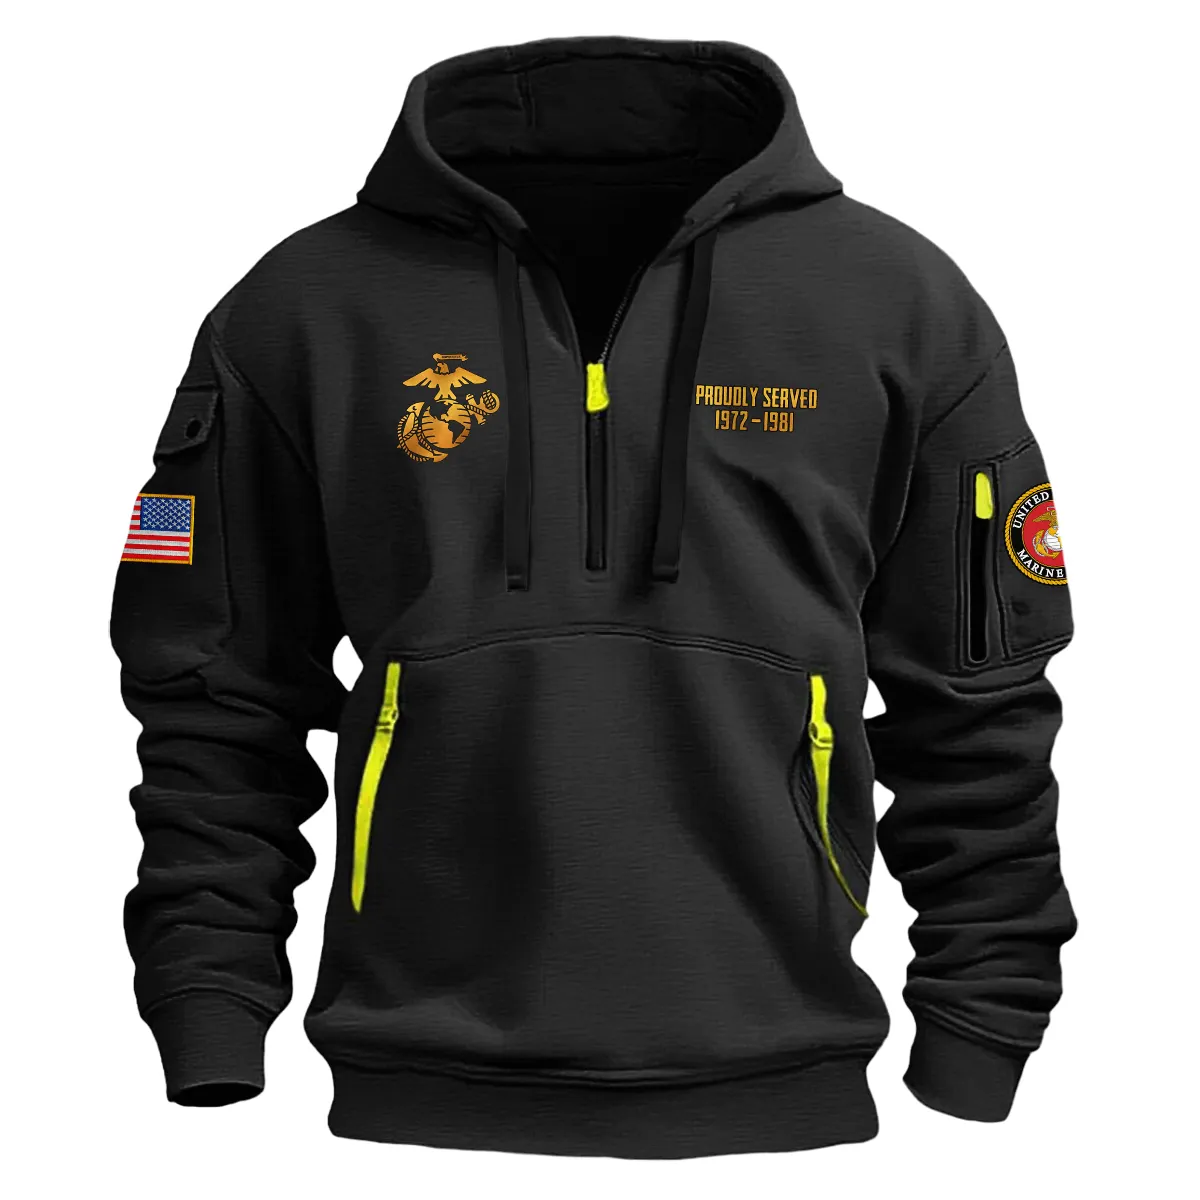 US Military All Branches! Personalized Gift U.S. Navy Fashion Hoodie Half Zipper